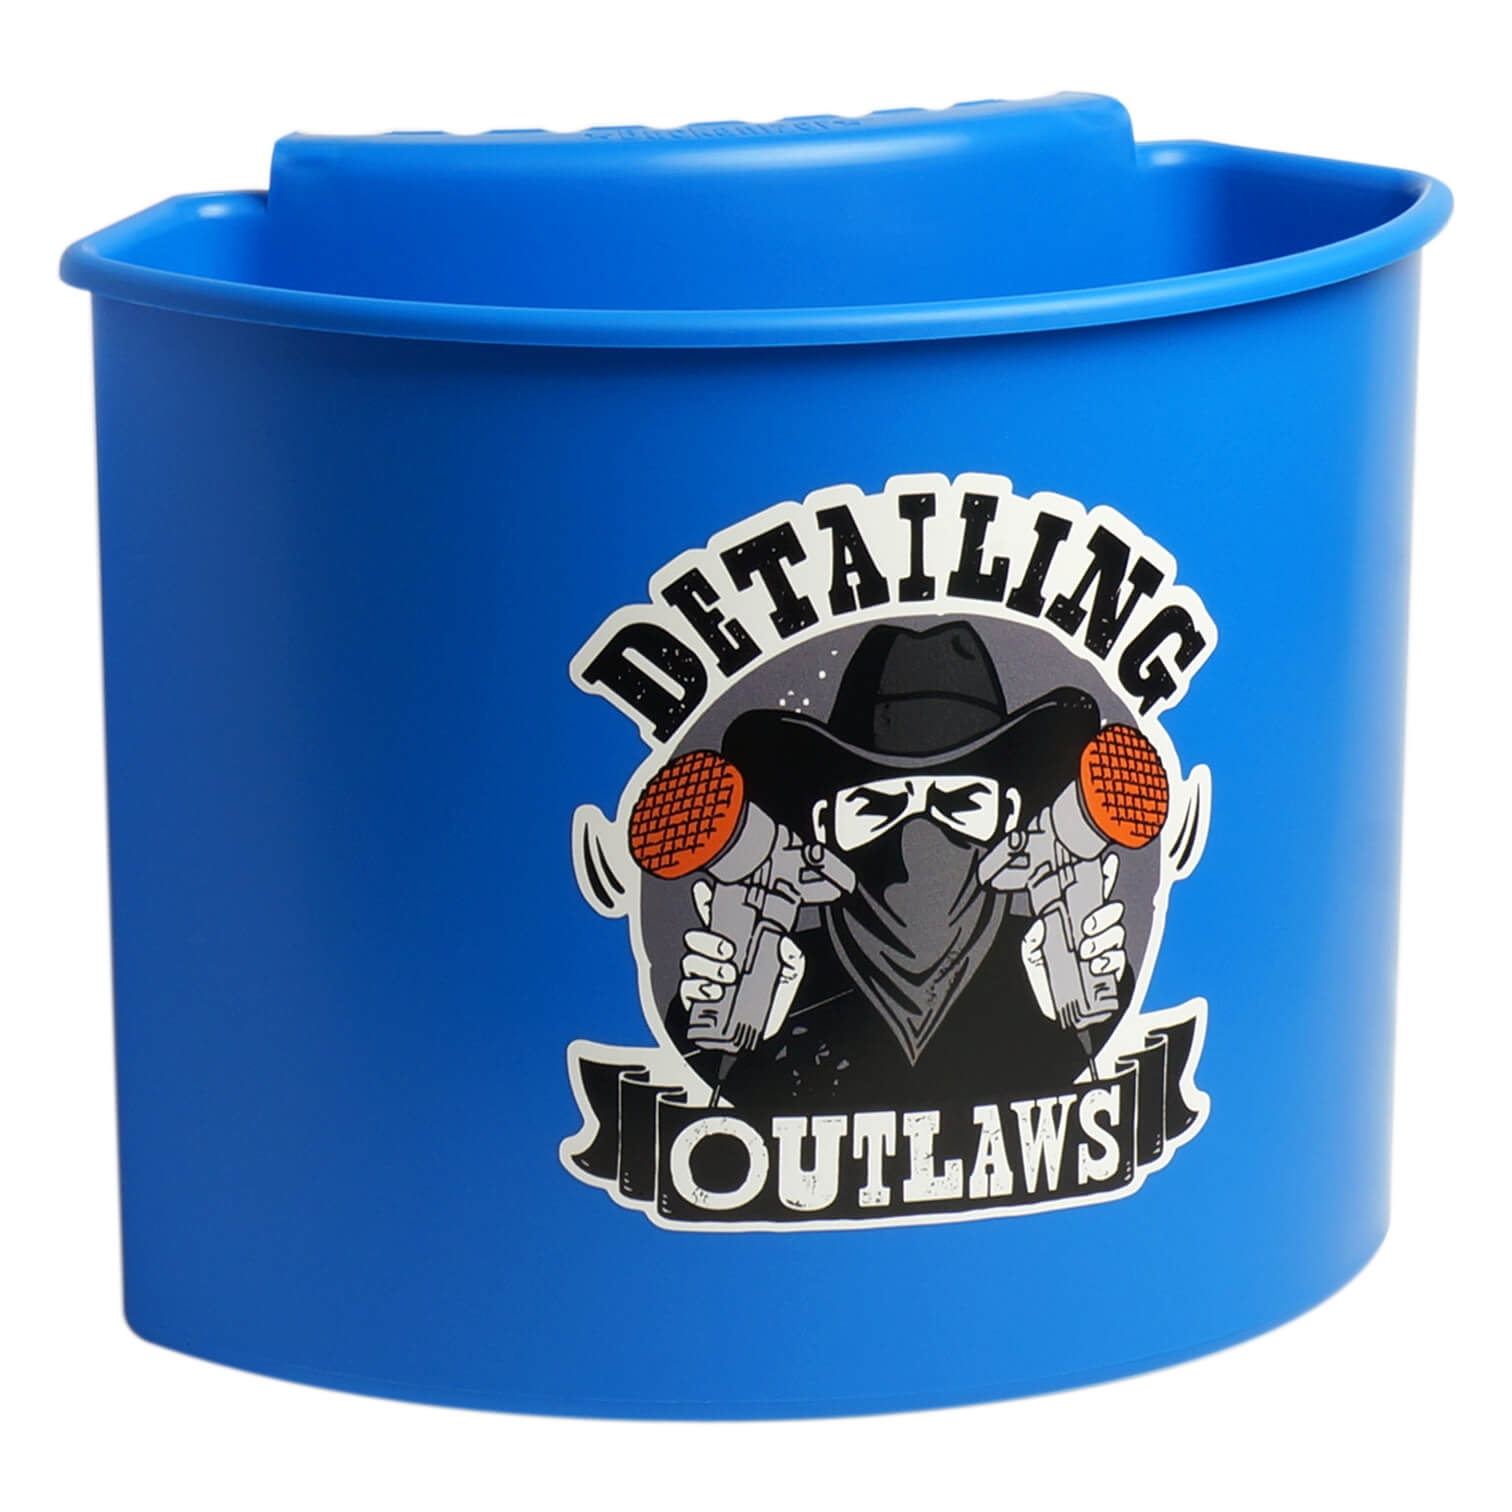 Detailing Outlaws Buckanizer Red